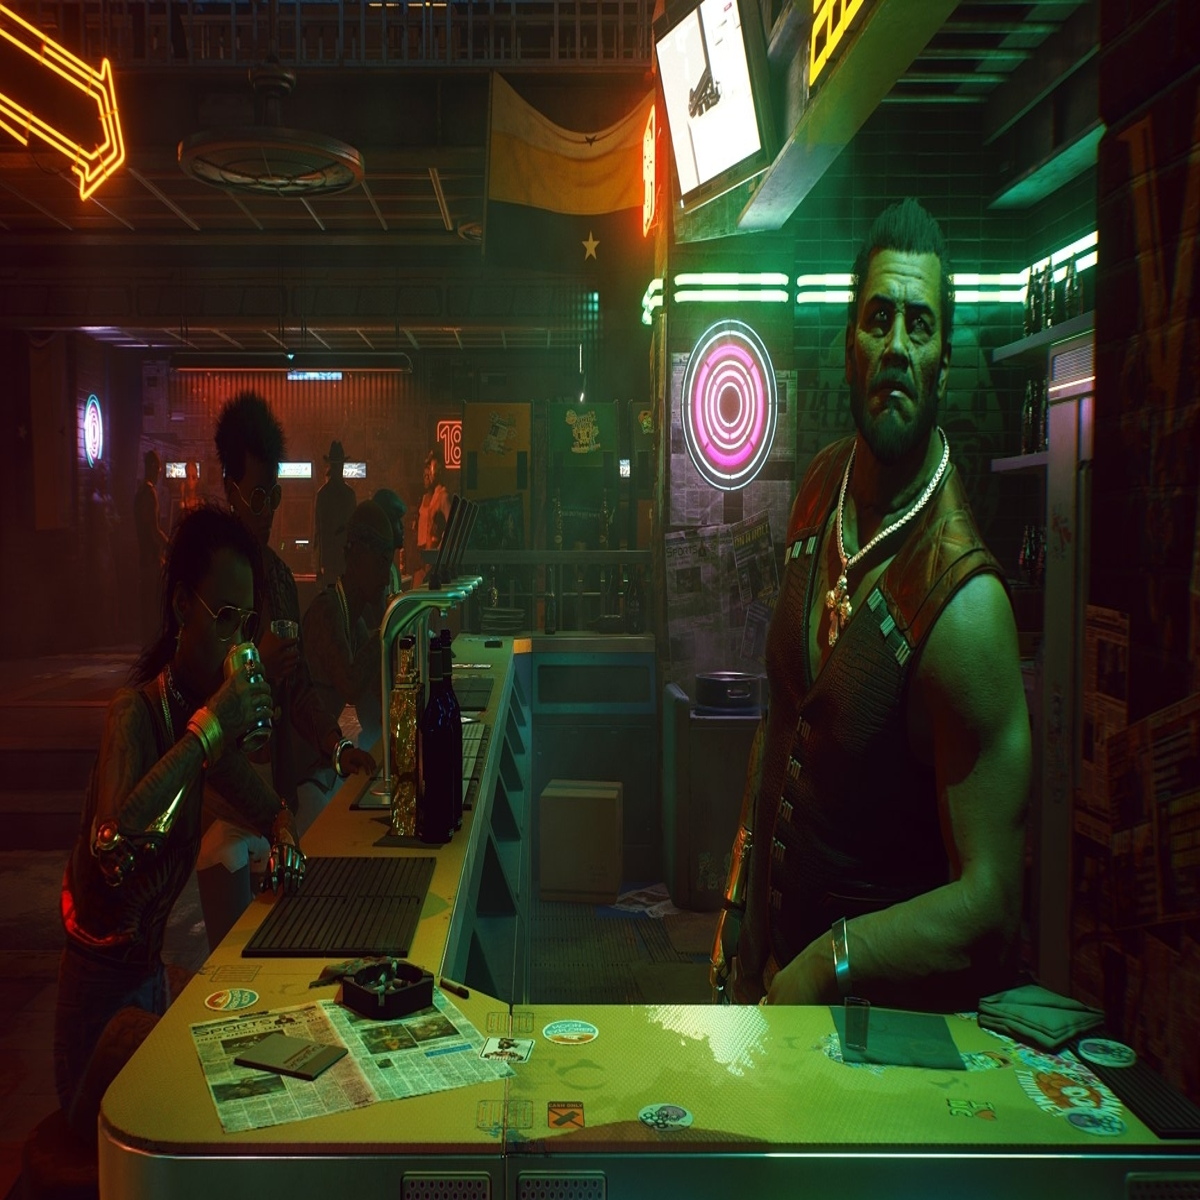 Welp, the Cyberpunk 2077 anime made me want to give the game another shot